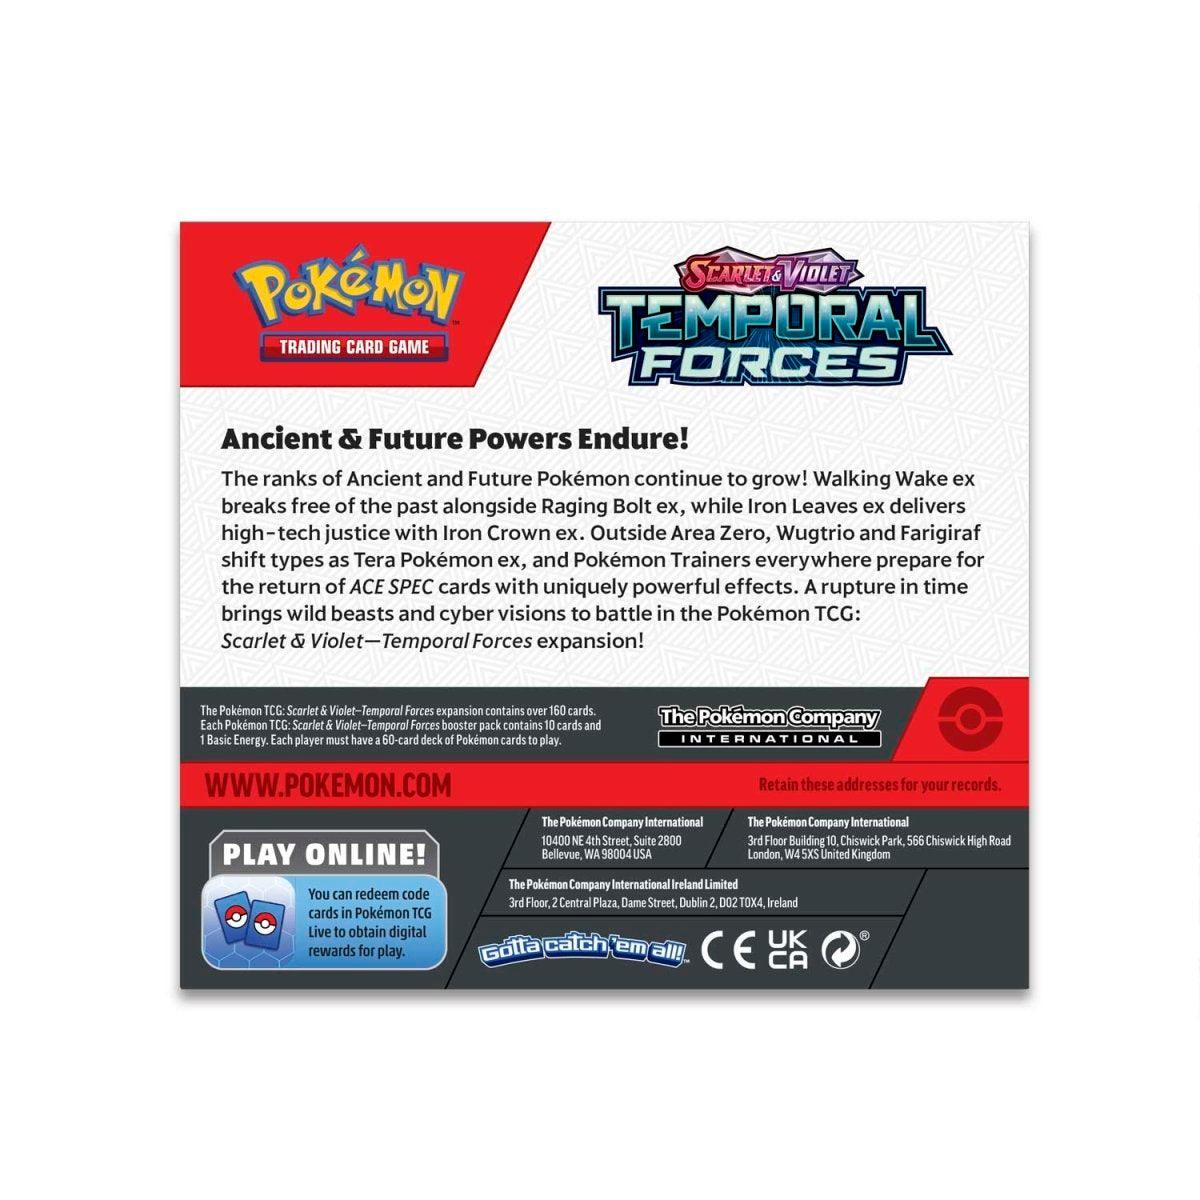 Pokemon Booster Box (36 Packs) - Scarlet & Violet - Temporal Forces - Hobby Champion Inc